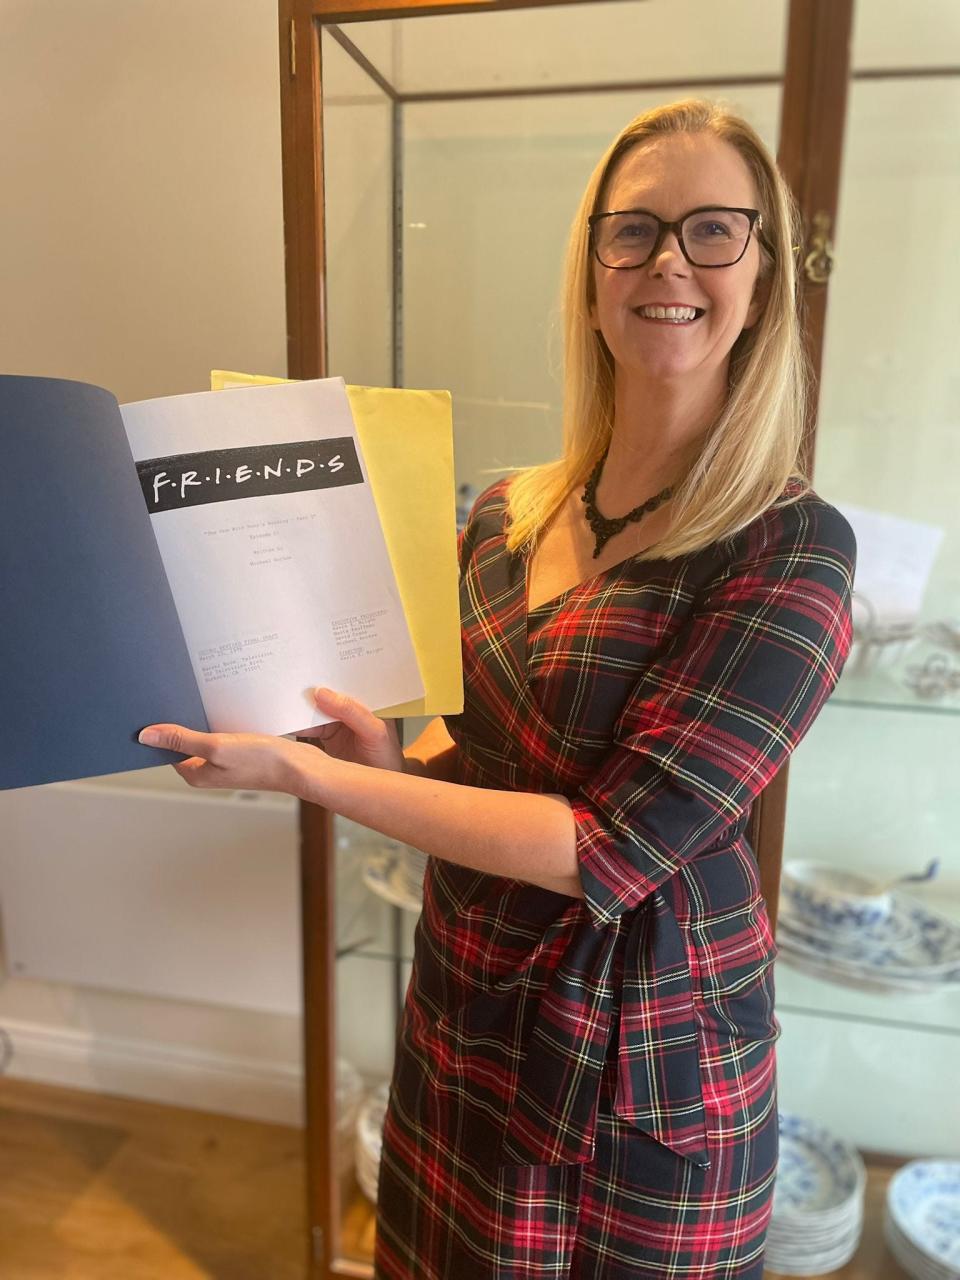 Amanda Butler, head of Hanson Ross, with the "Friends" scripts.